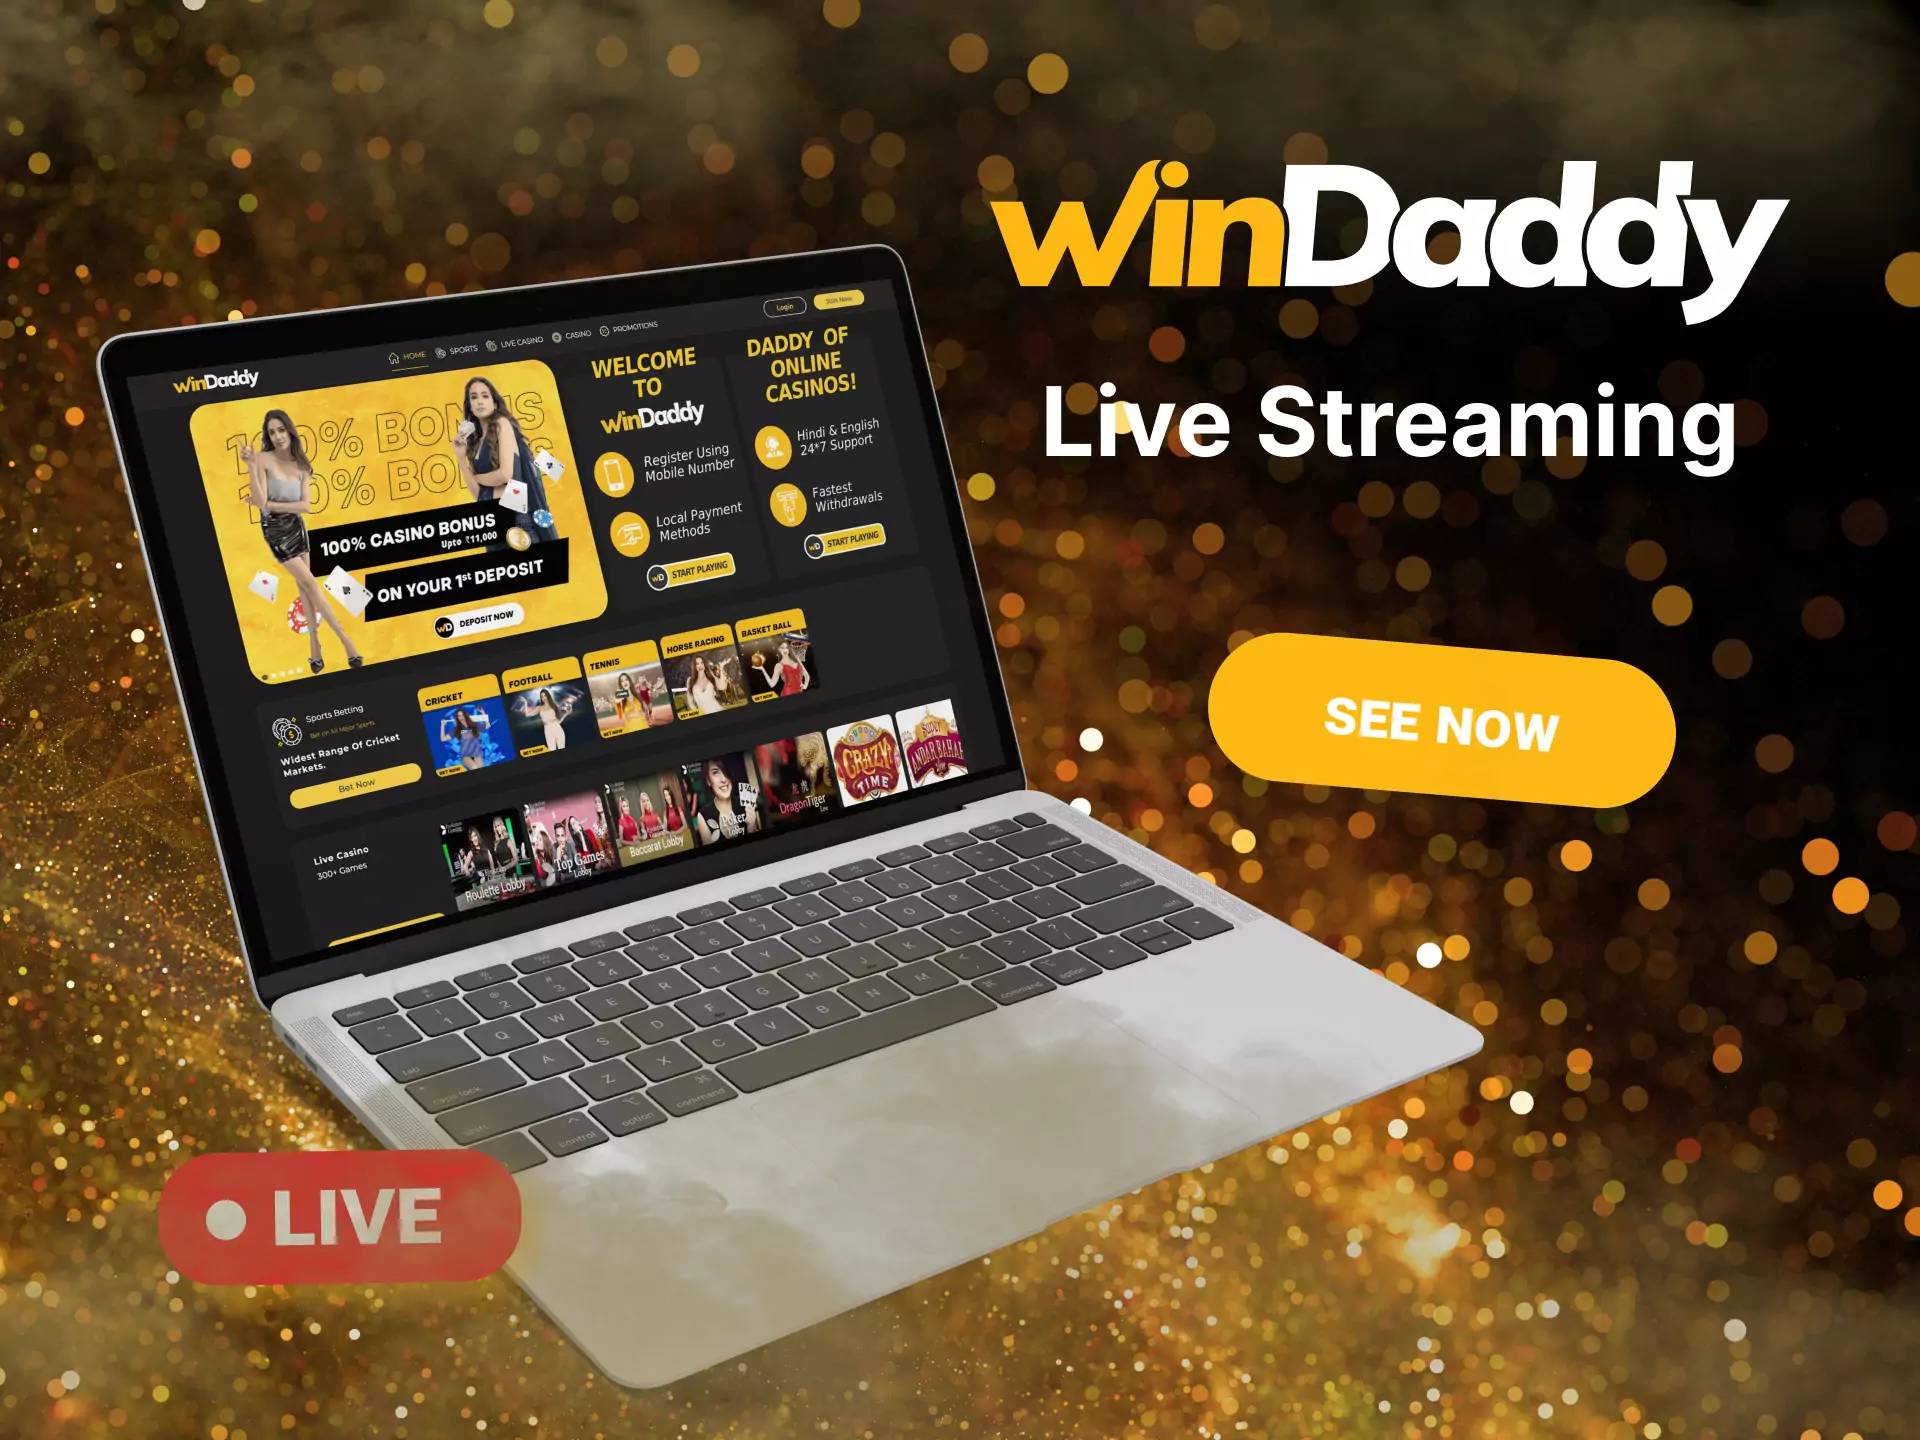 Watch live streaming for any sport on Windaddy.